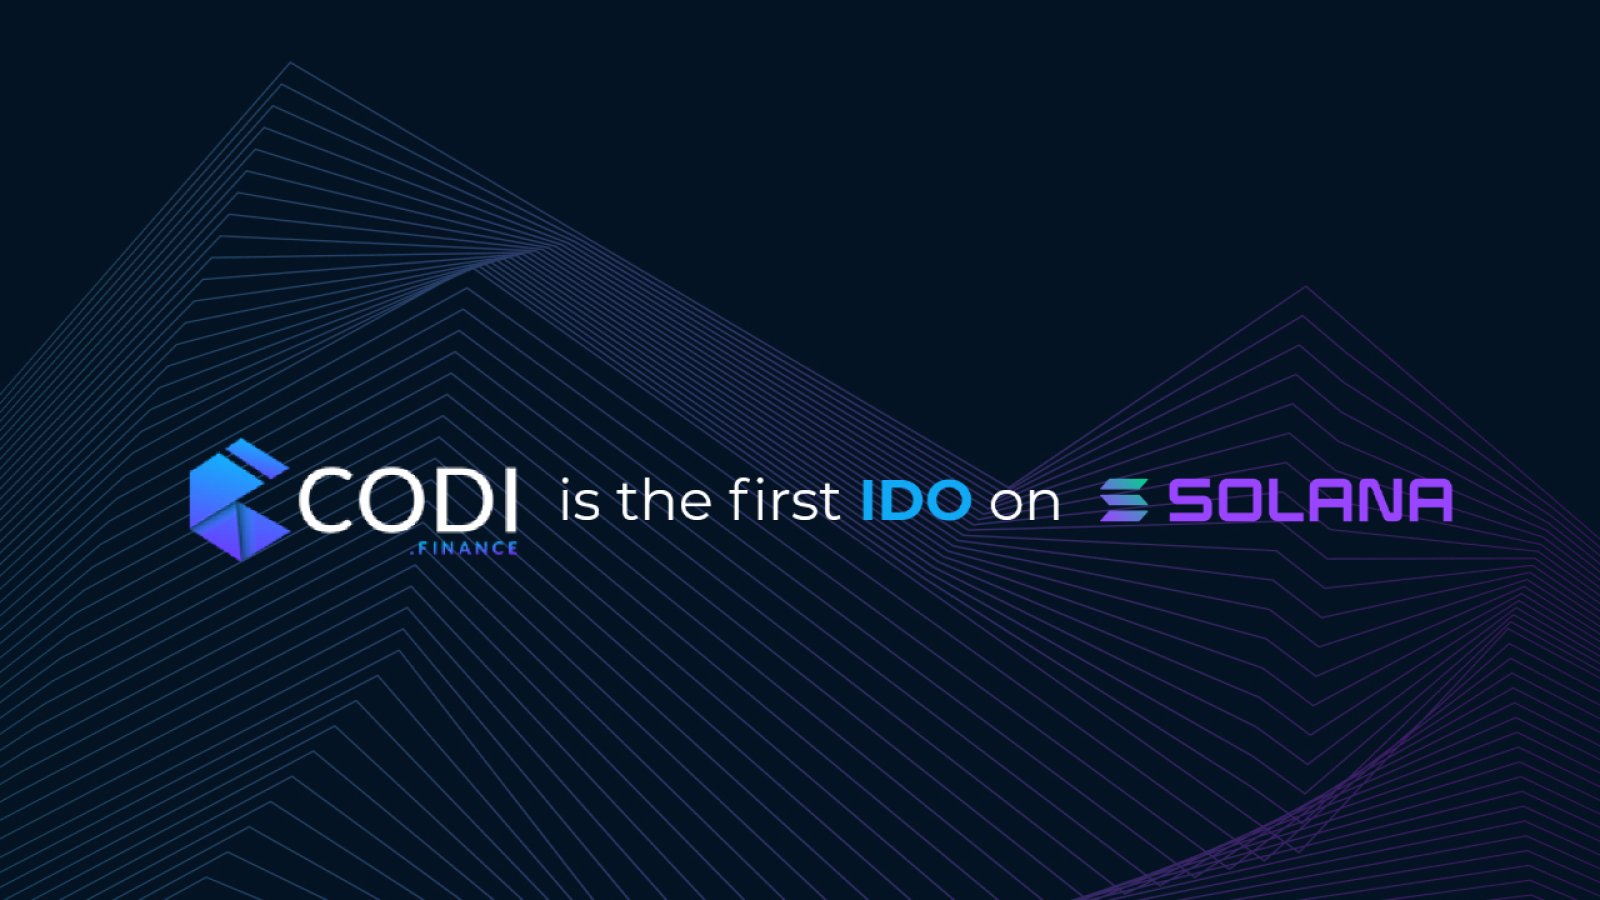 CODI Presents the Beginning of IDO While the Private Sale Ends on November 14th